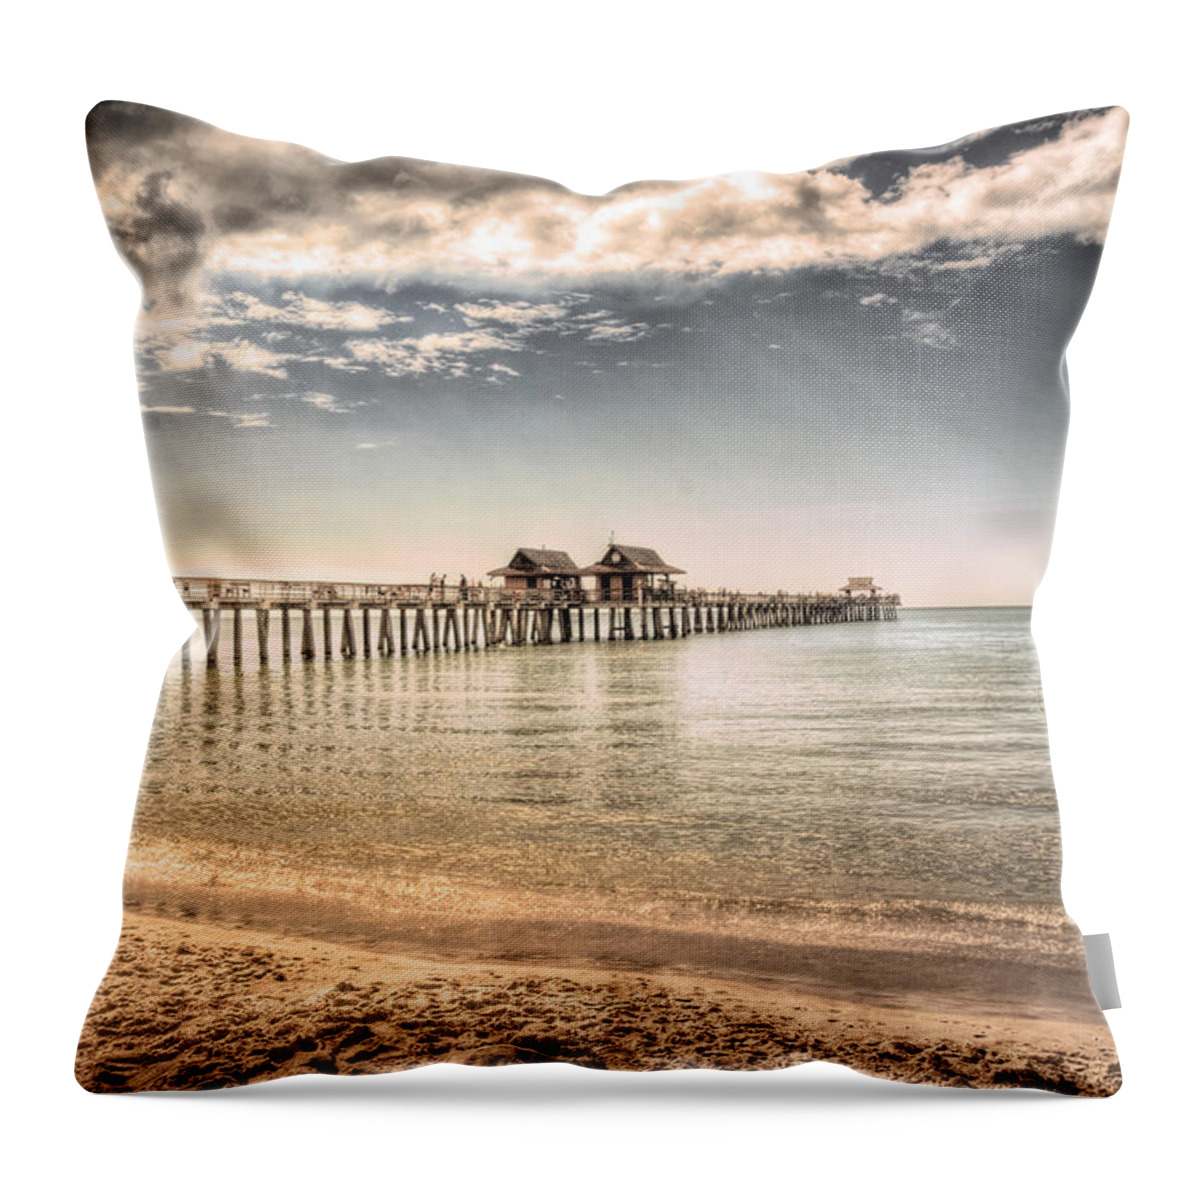 Naples Throw Pillow featuring the photograph Naples Pier by Margie Hurwich